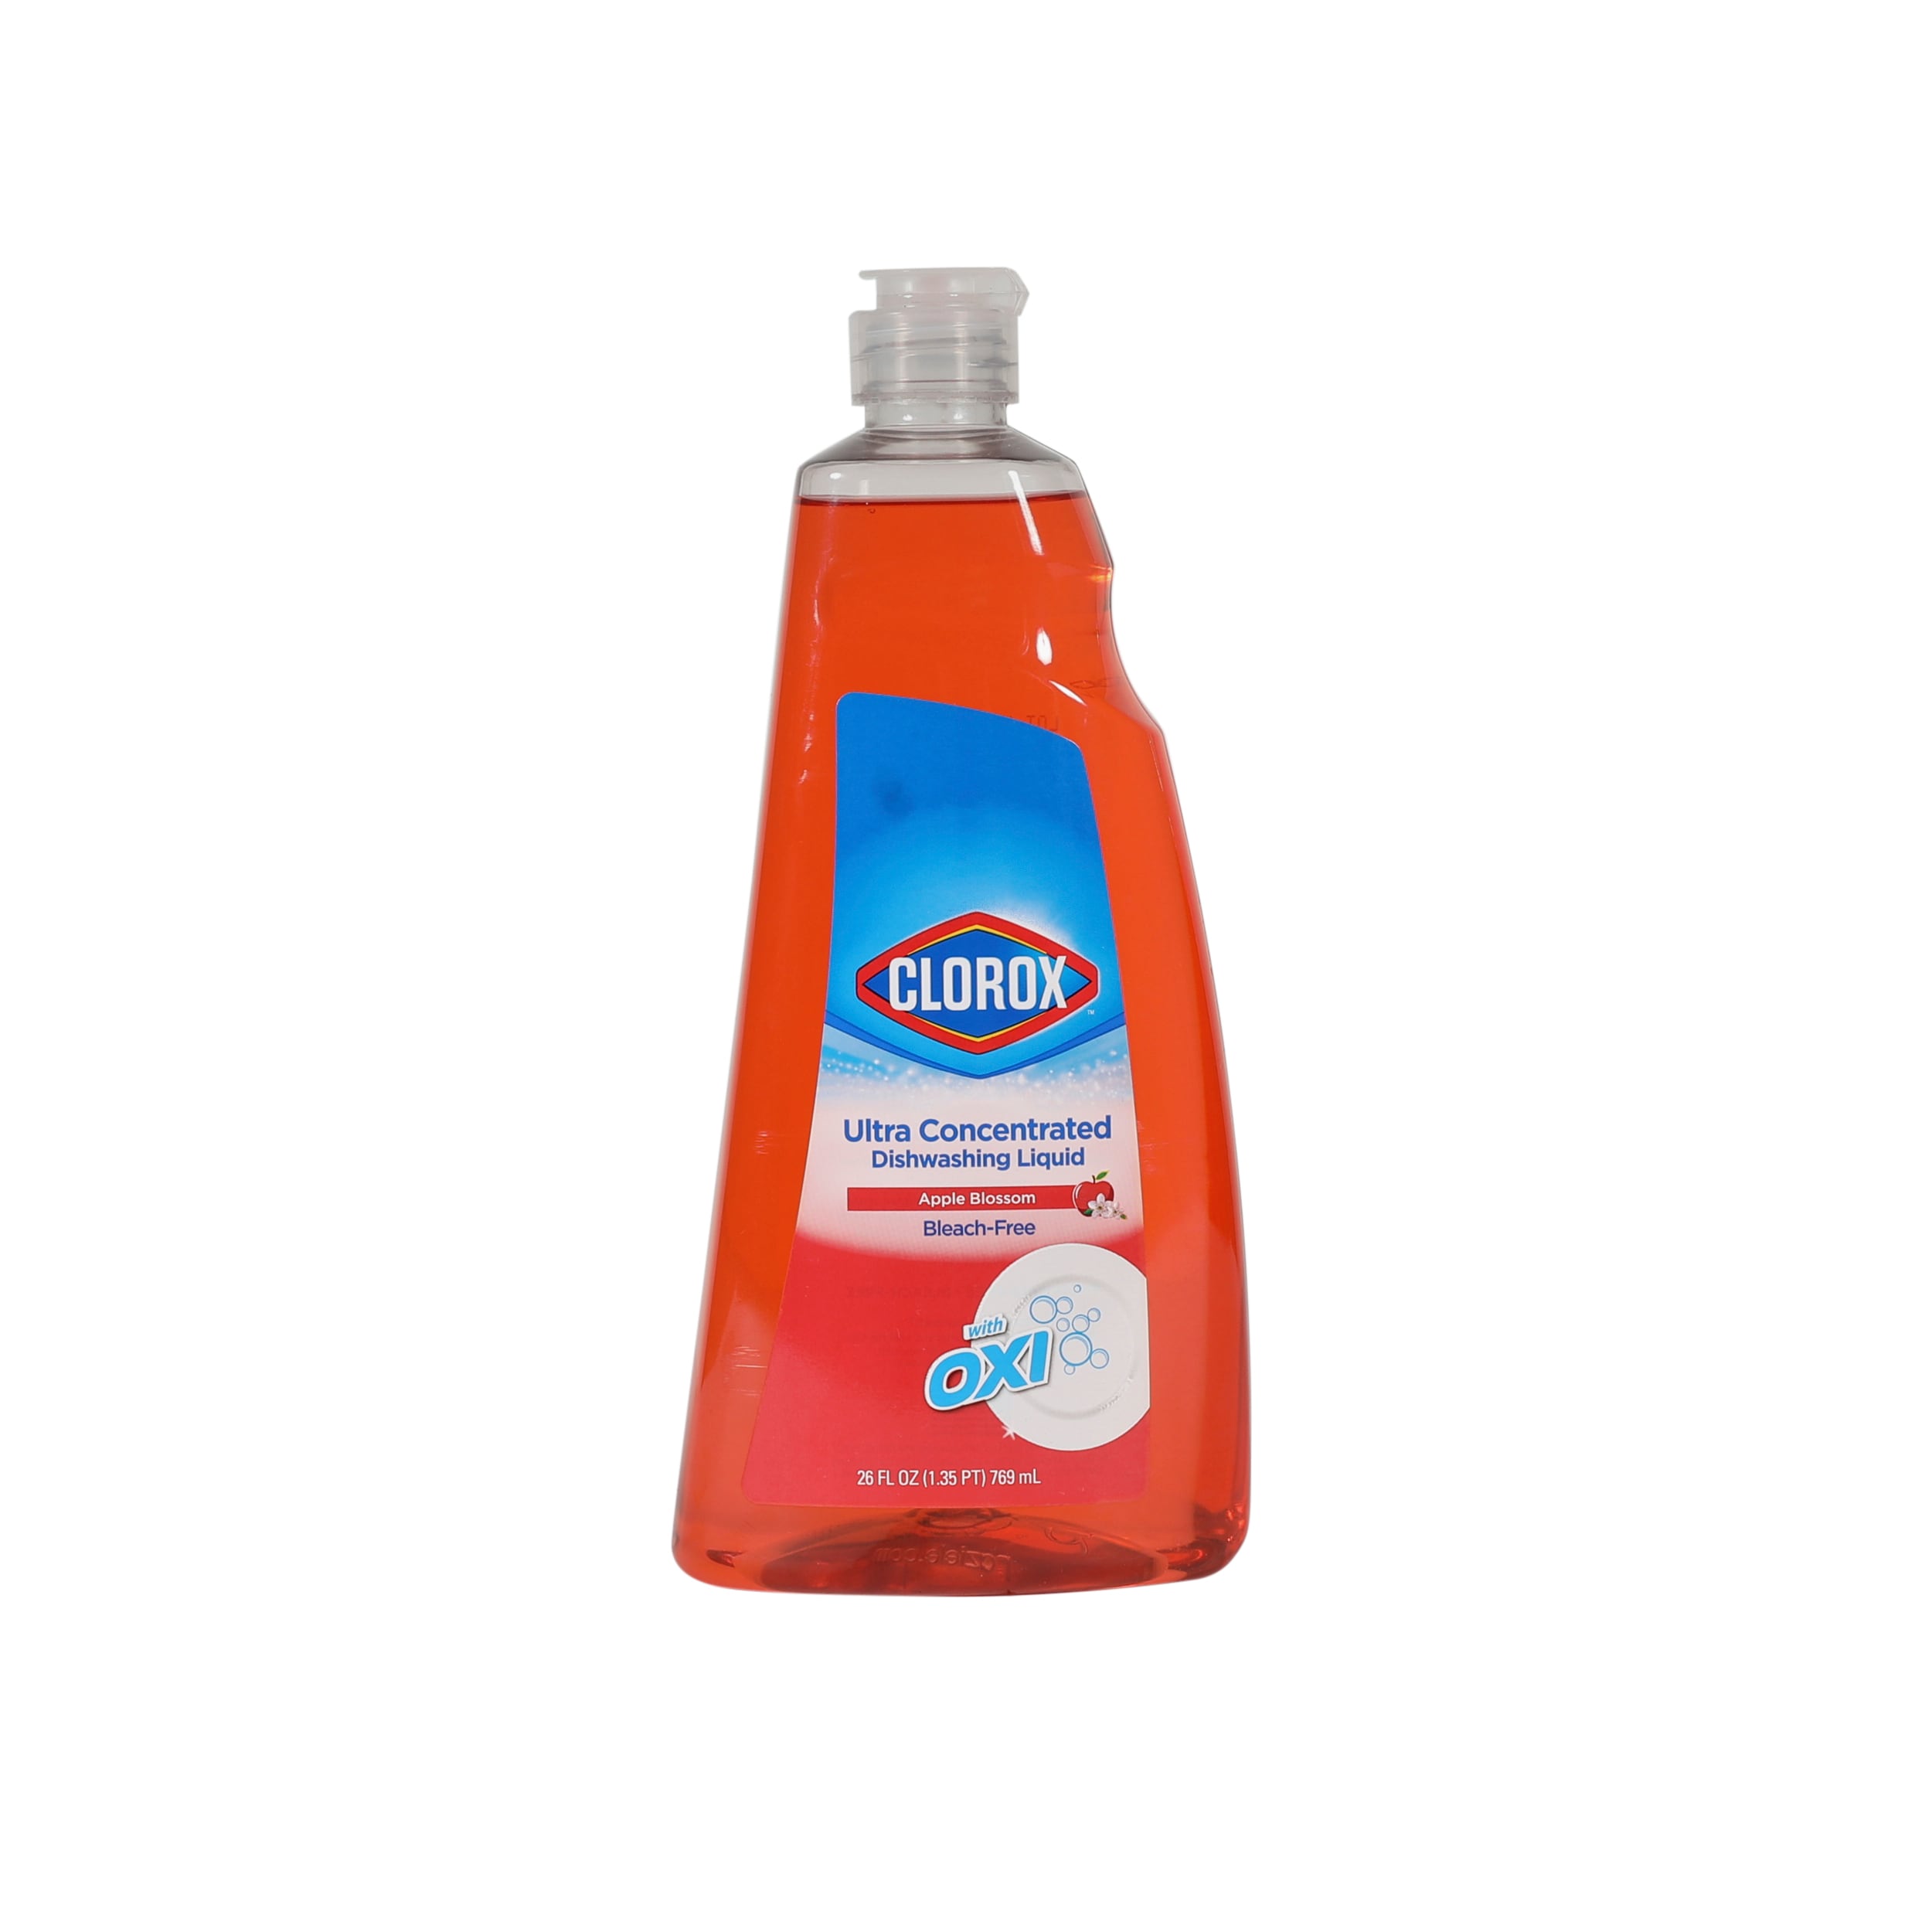  Clorox Liquid Dish Soap with Oxi in Fresh Scent, 40 Fl Oz, Bleach-Free Dishwashing Liquid Powers Through Grease to Wash Dishes and  Clean